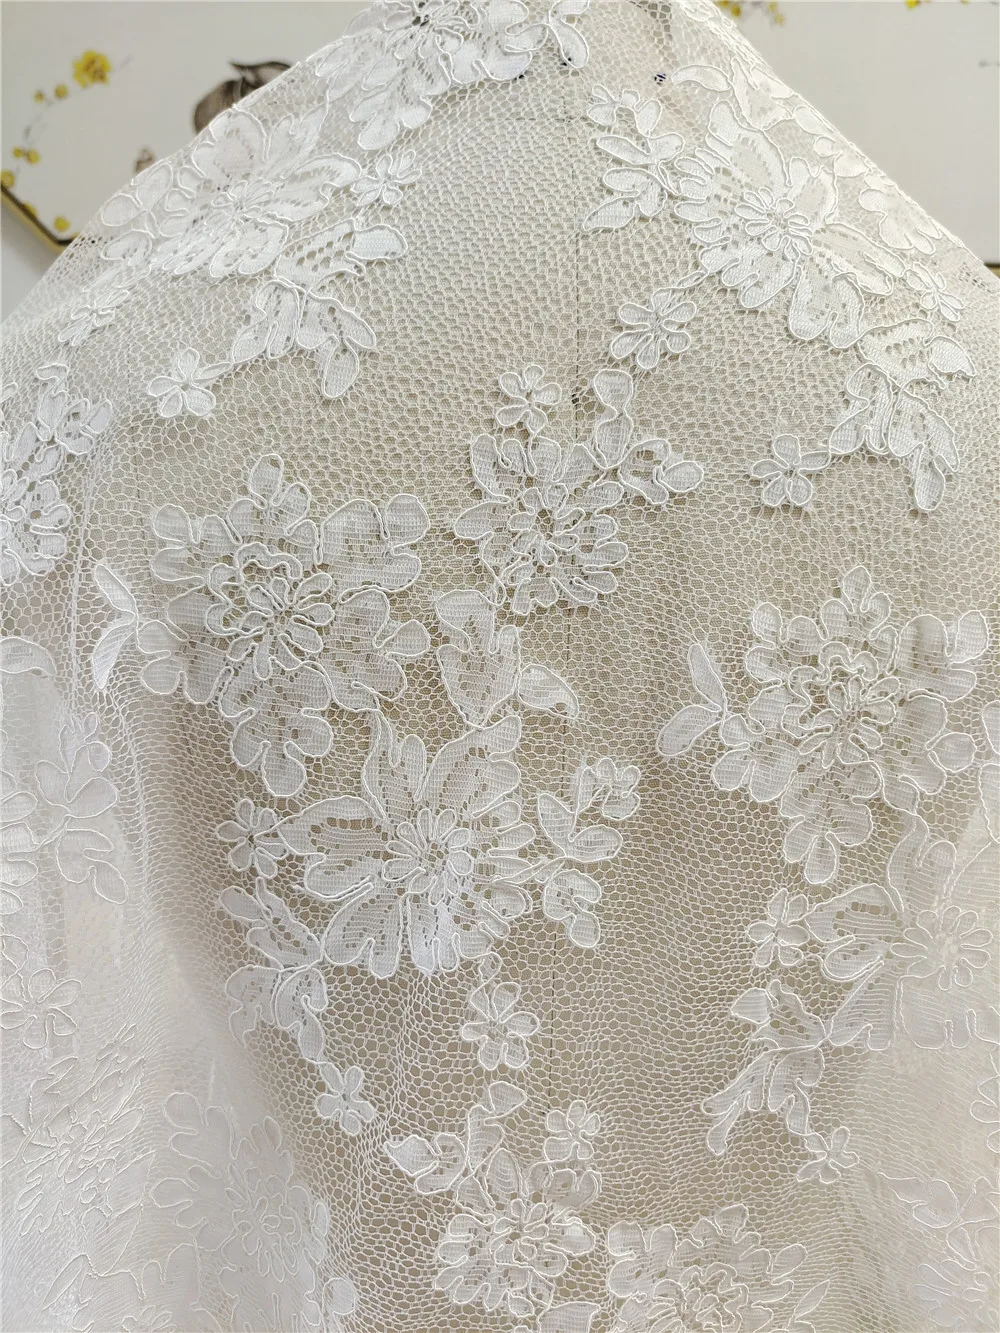 Jacquard Cording Lace Fabric Off White Florals Wedding Dress Material 2023 Special Price!